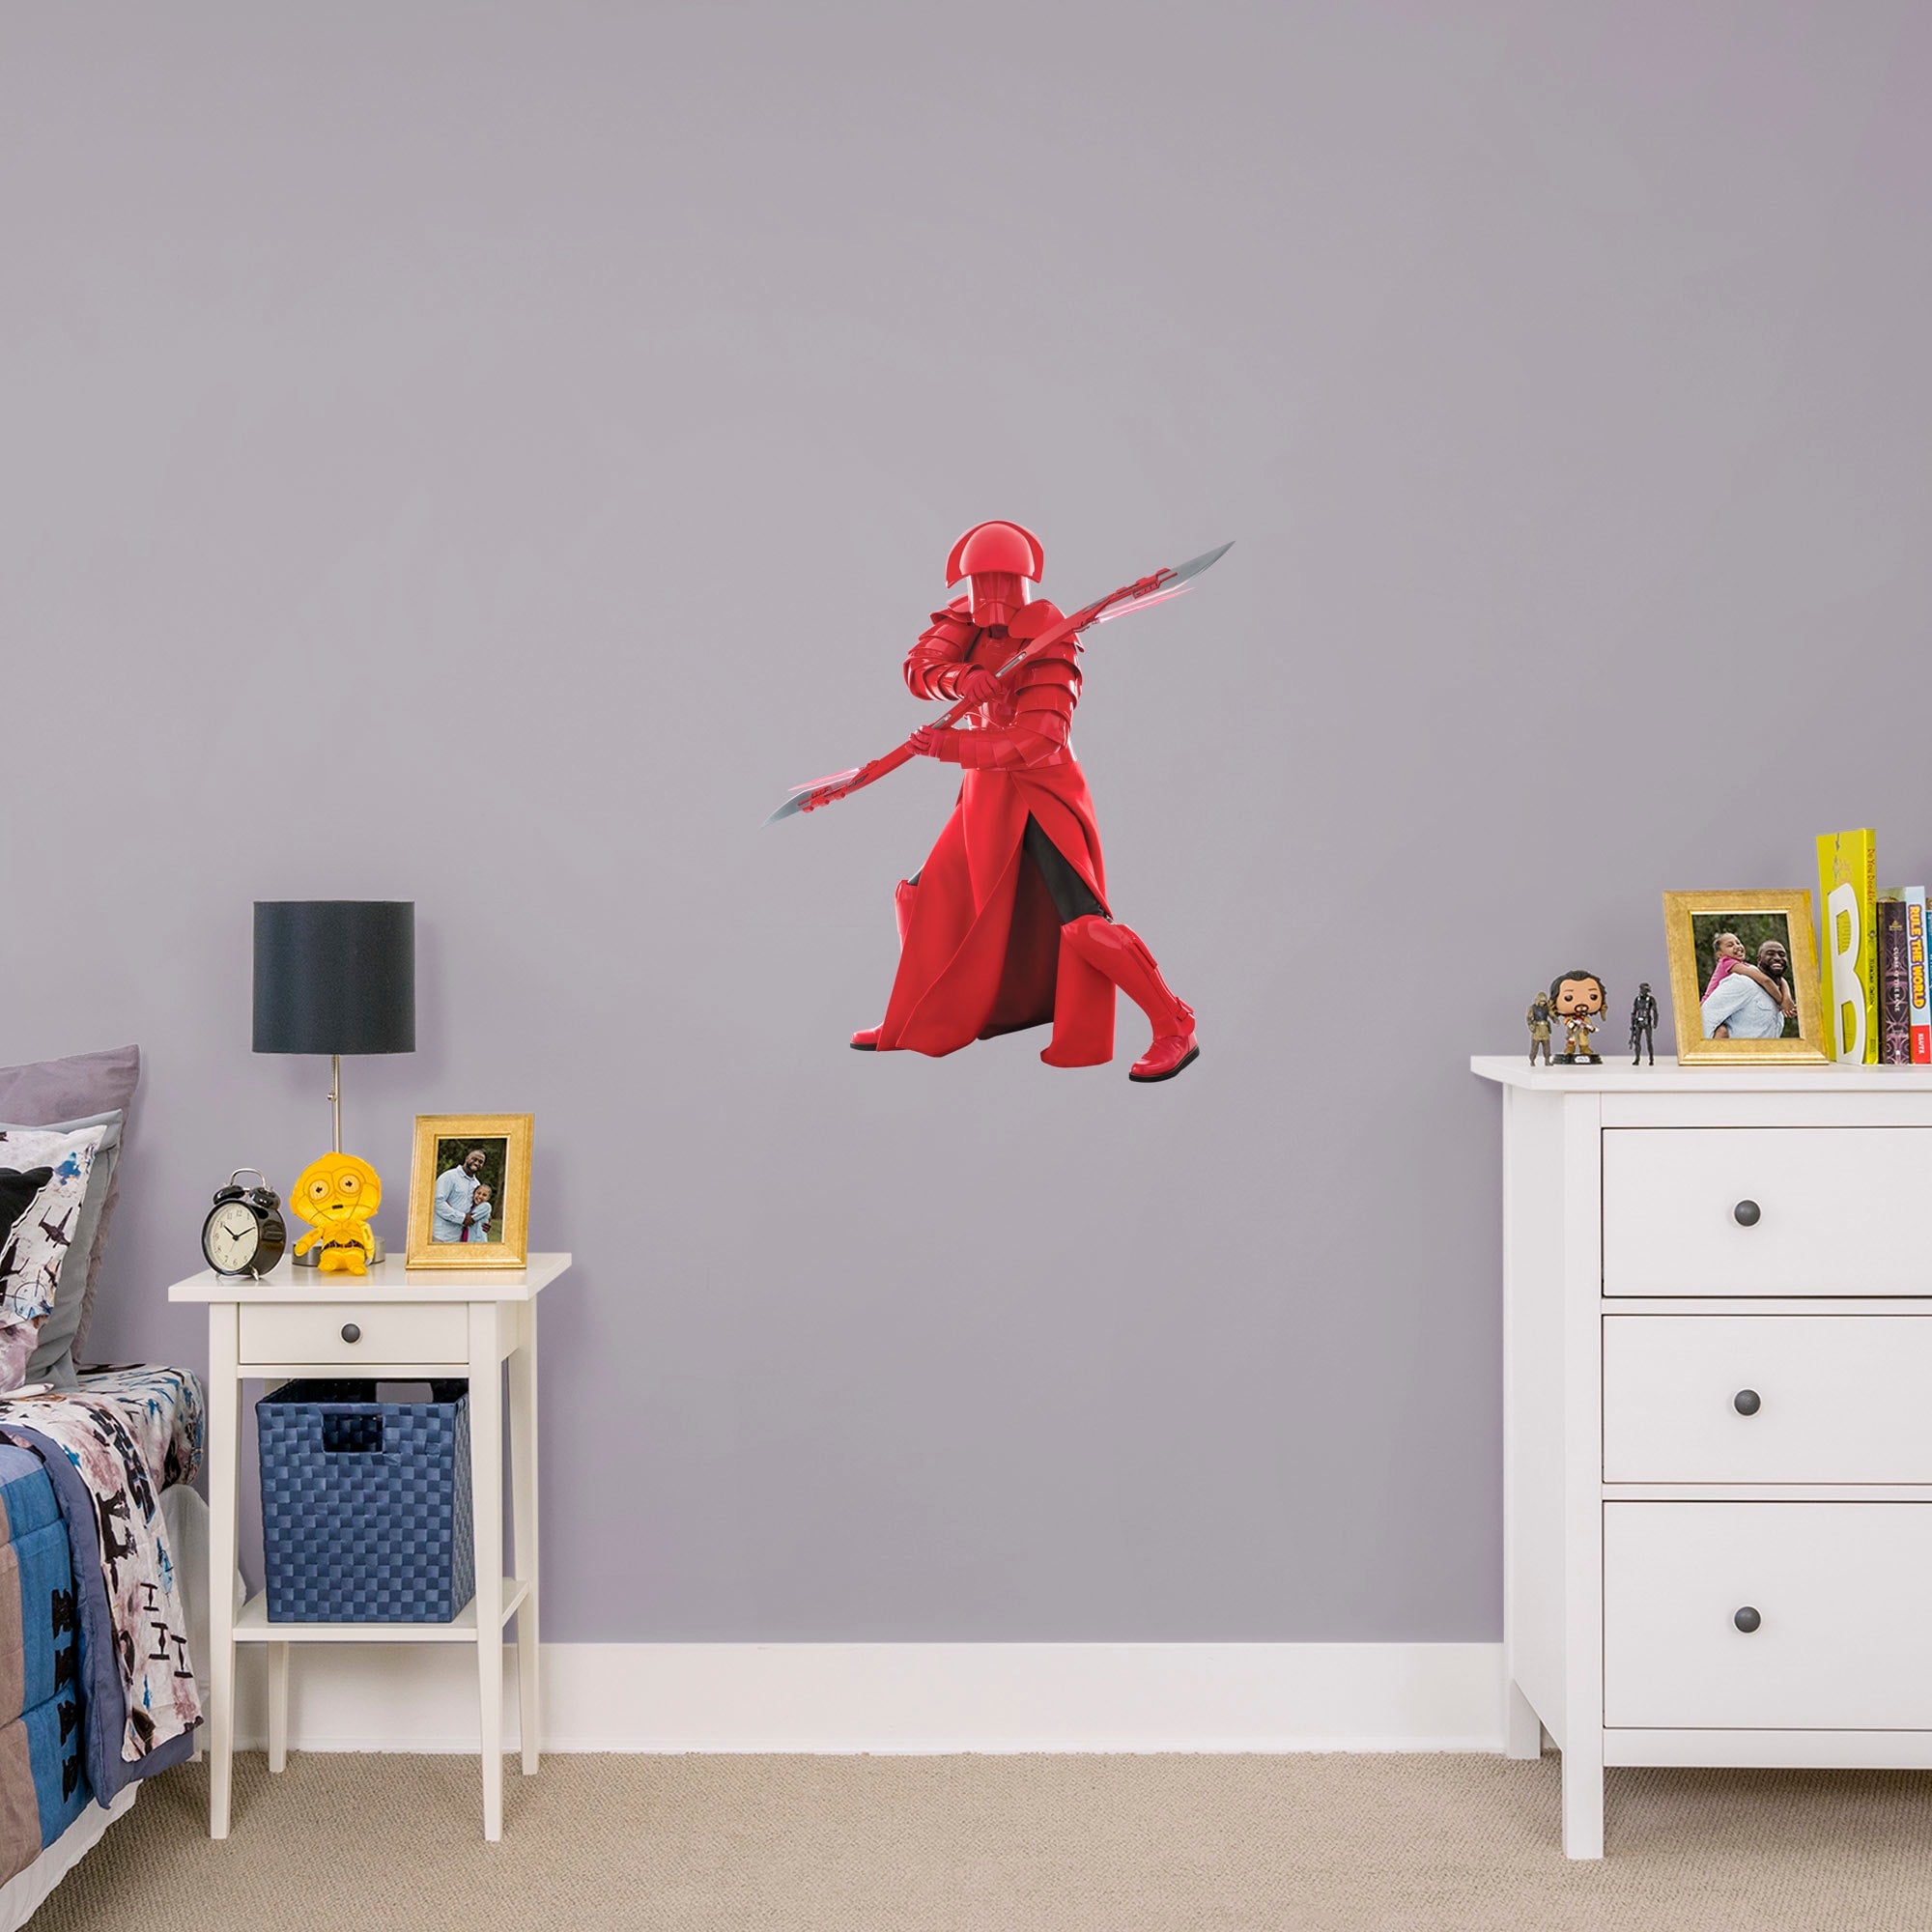 Praetorian Guard - Officially Licensed Removable Wall Decal XL by Fathead | Vinyl